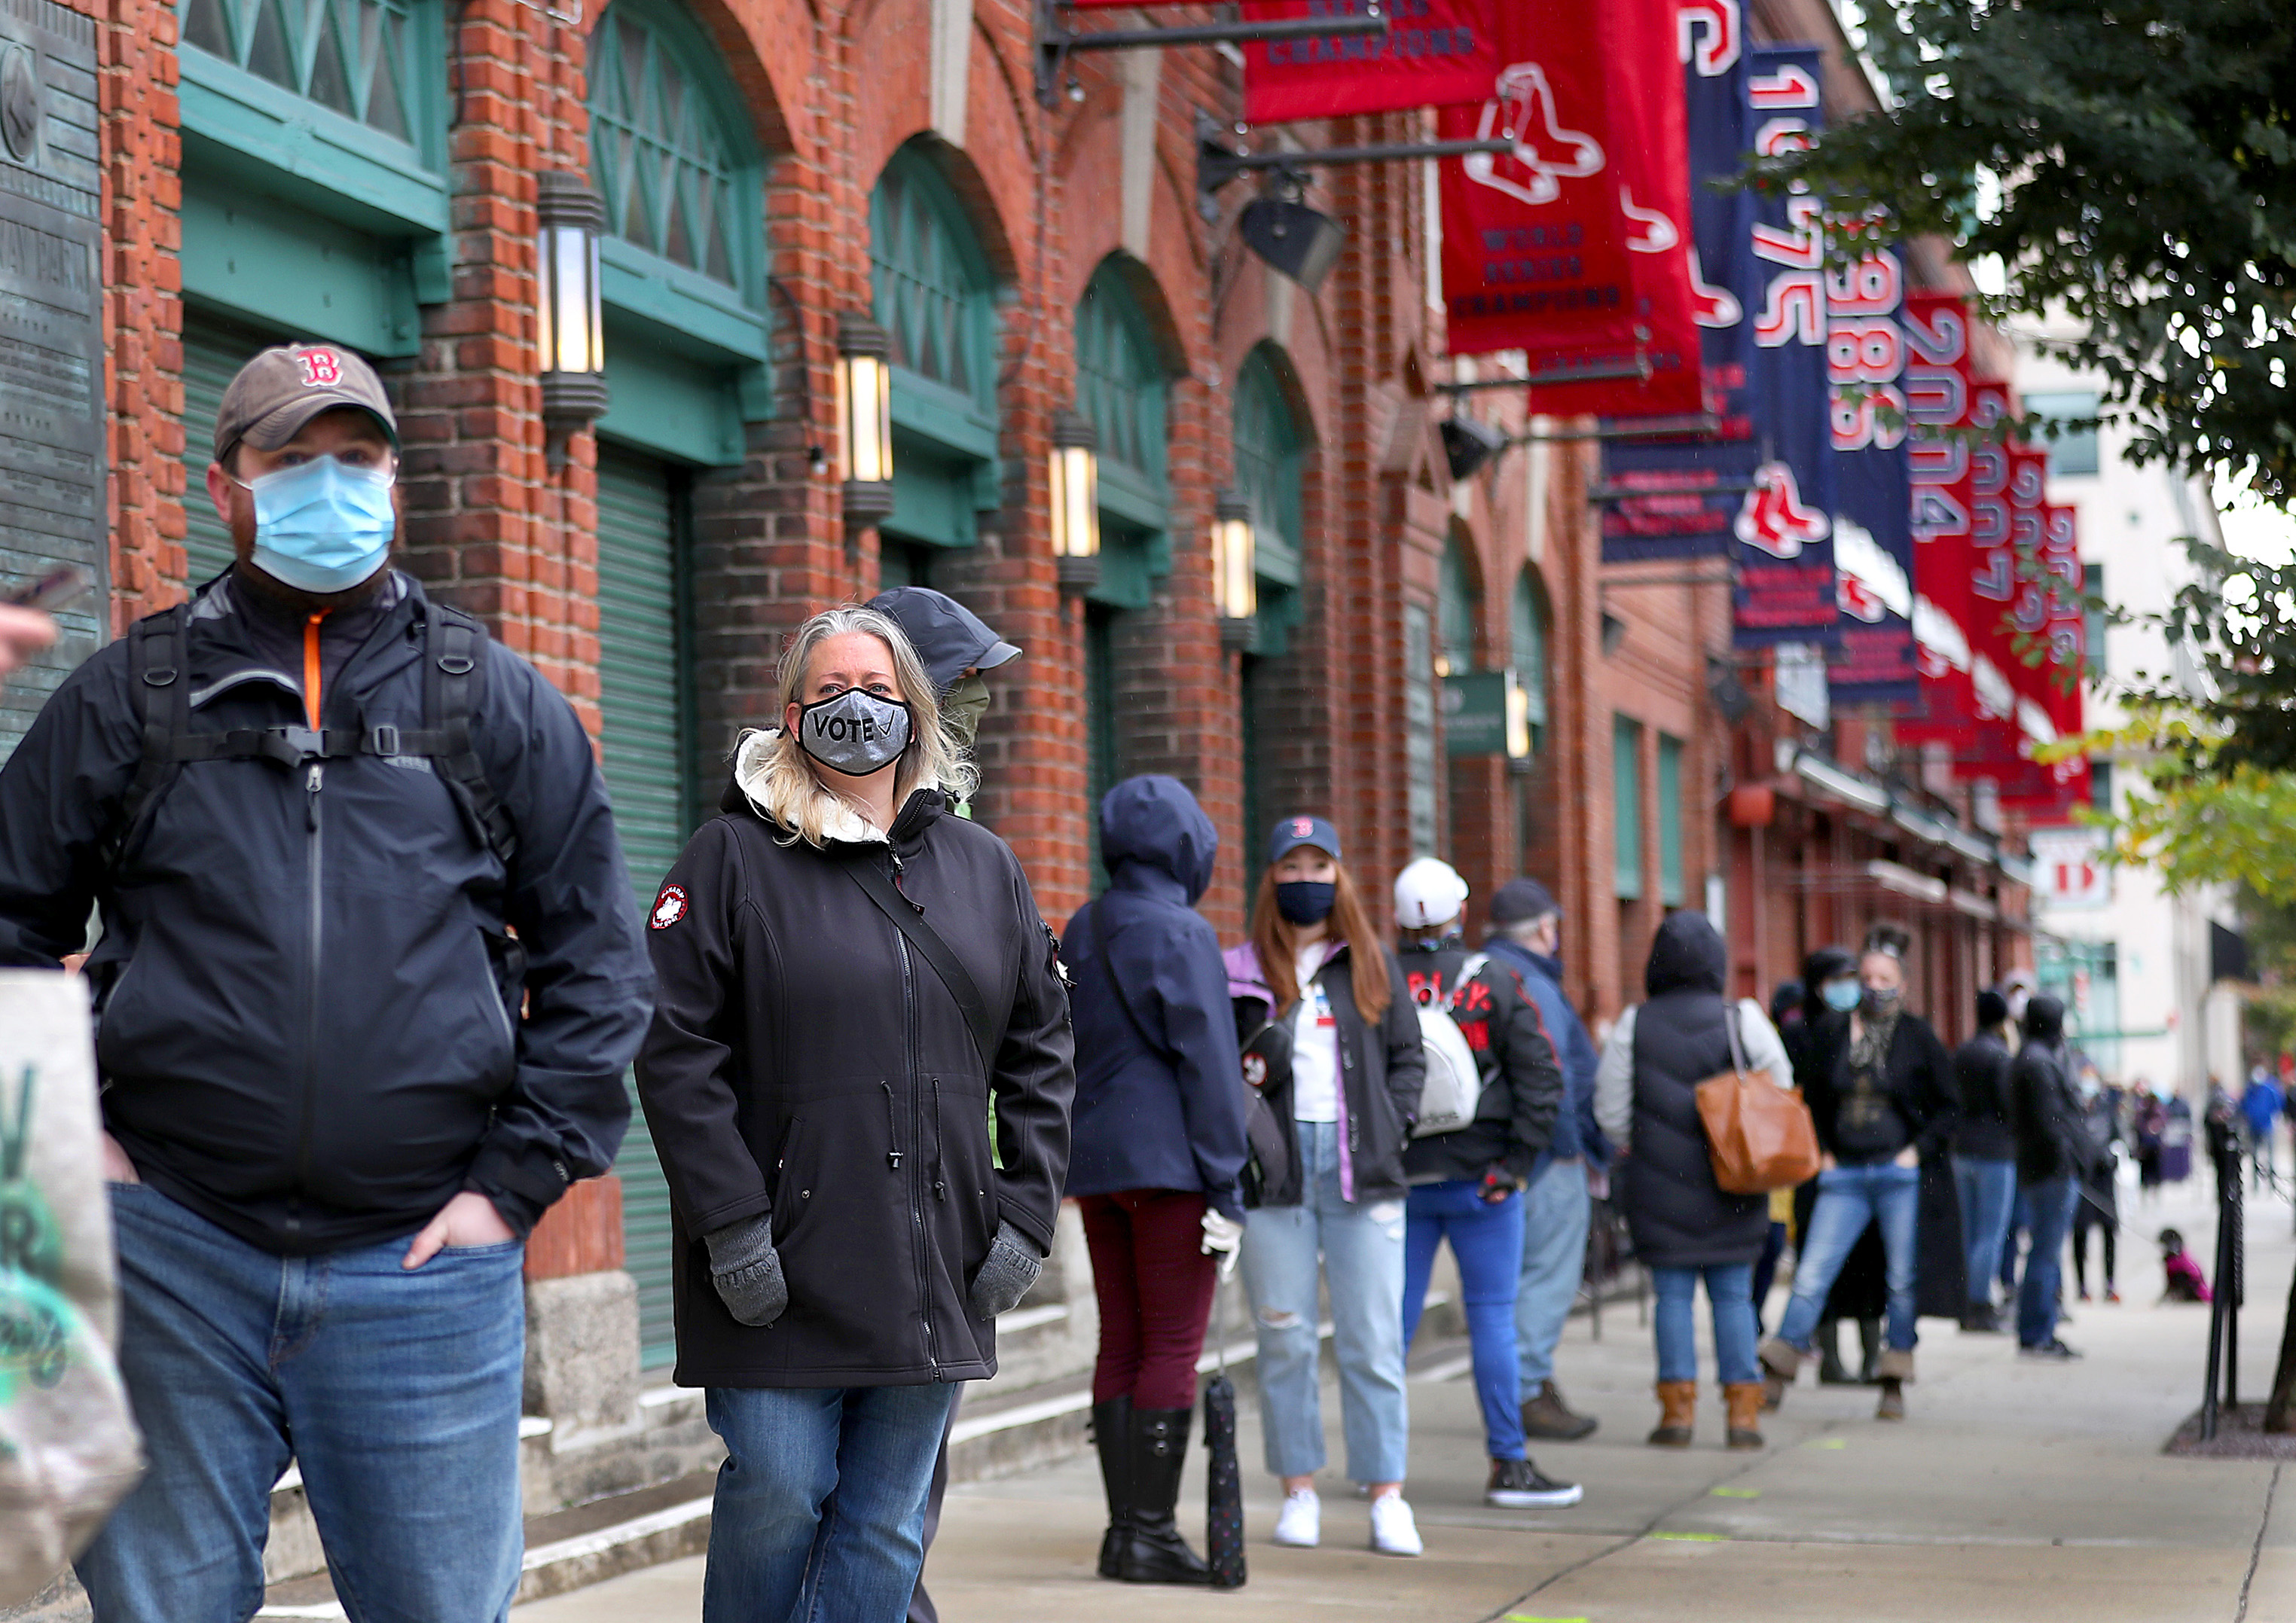 Fenway Park hosts early voting for Boston residents this weekend